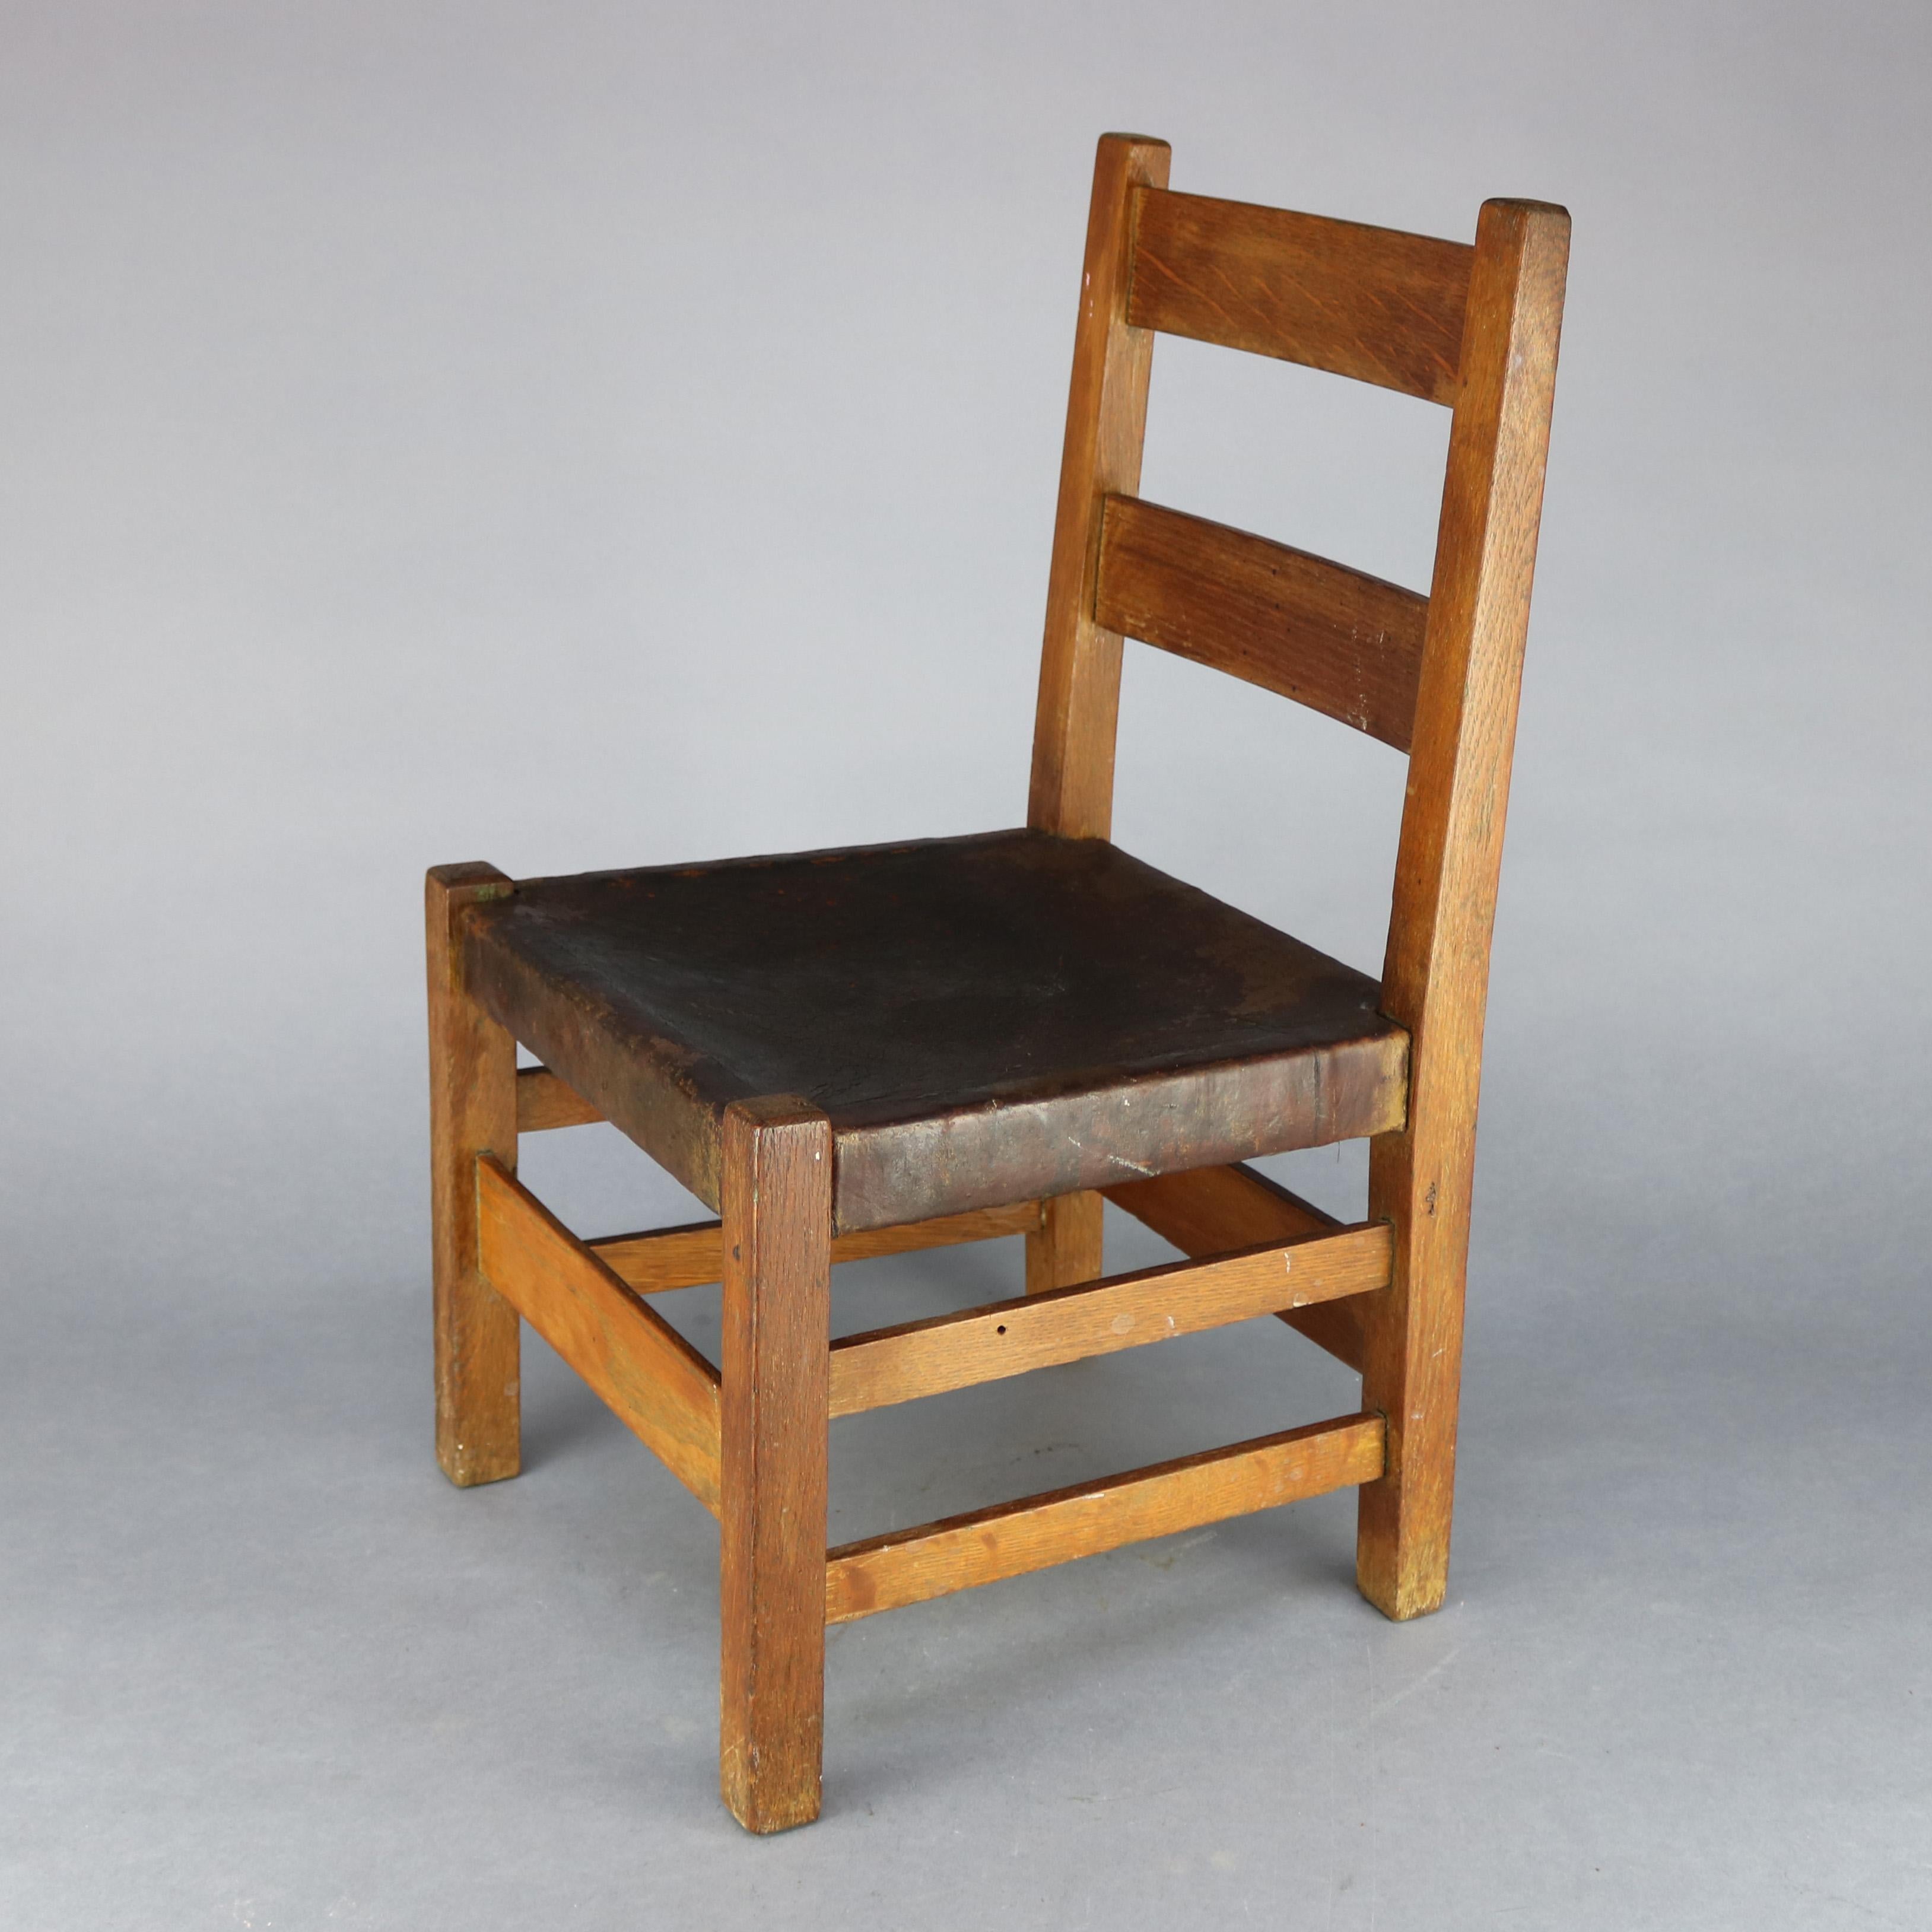 An antique Arts and Crafts Mission Child's Small Chair by Gustav Stickley, Catalog #344, offers oak construction with slat back over leather seat and raised on square and straight legs, signature mark not visible but chair is represented in Gustav